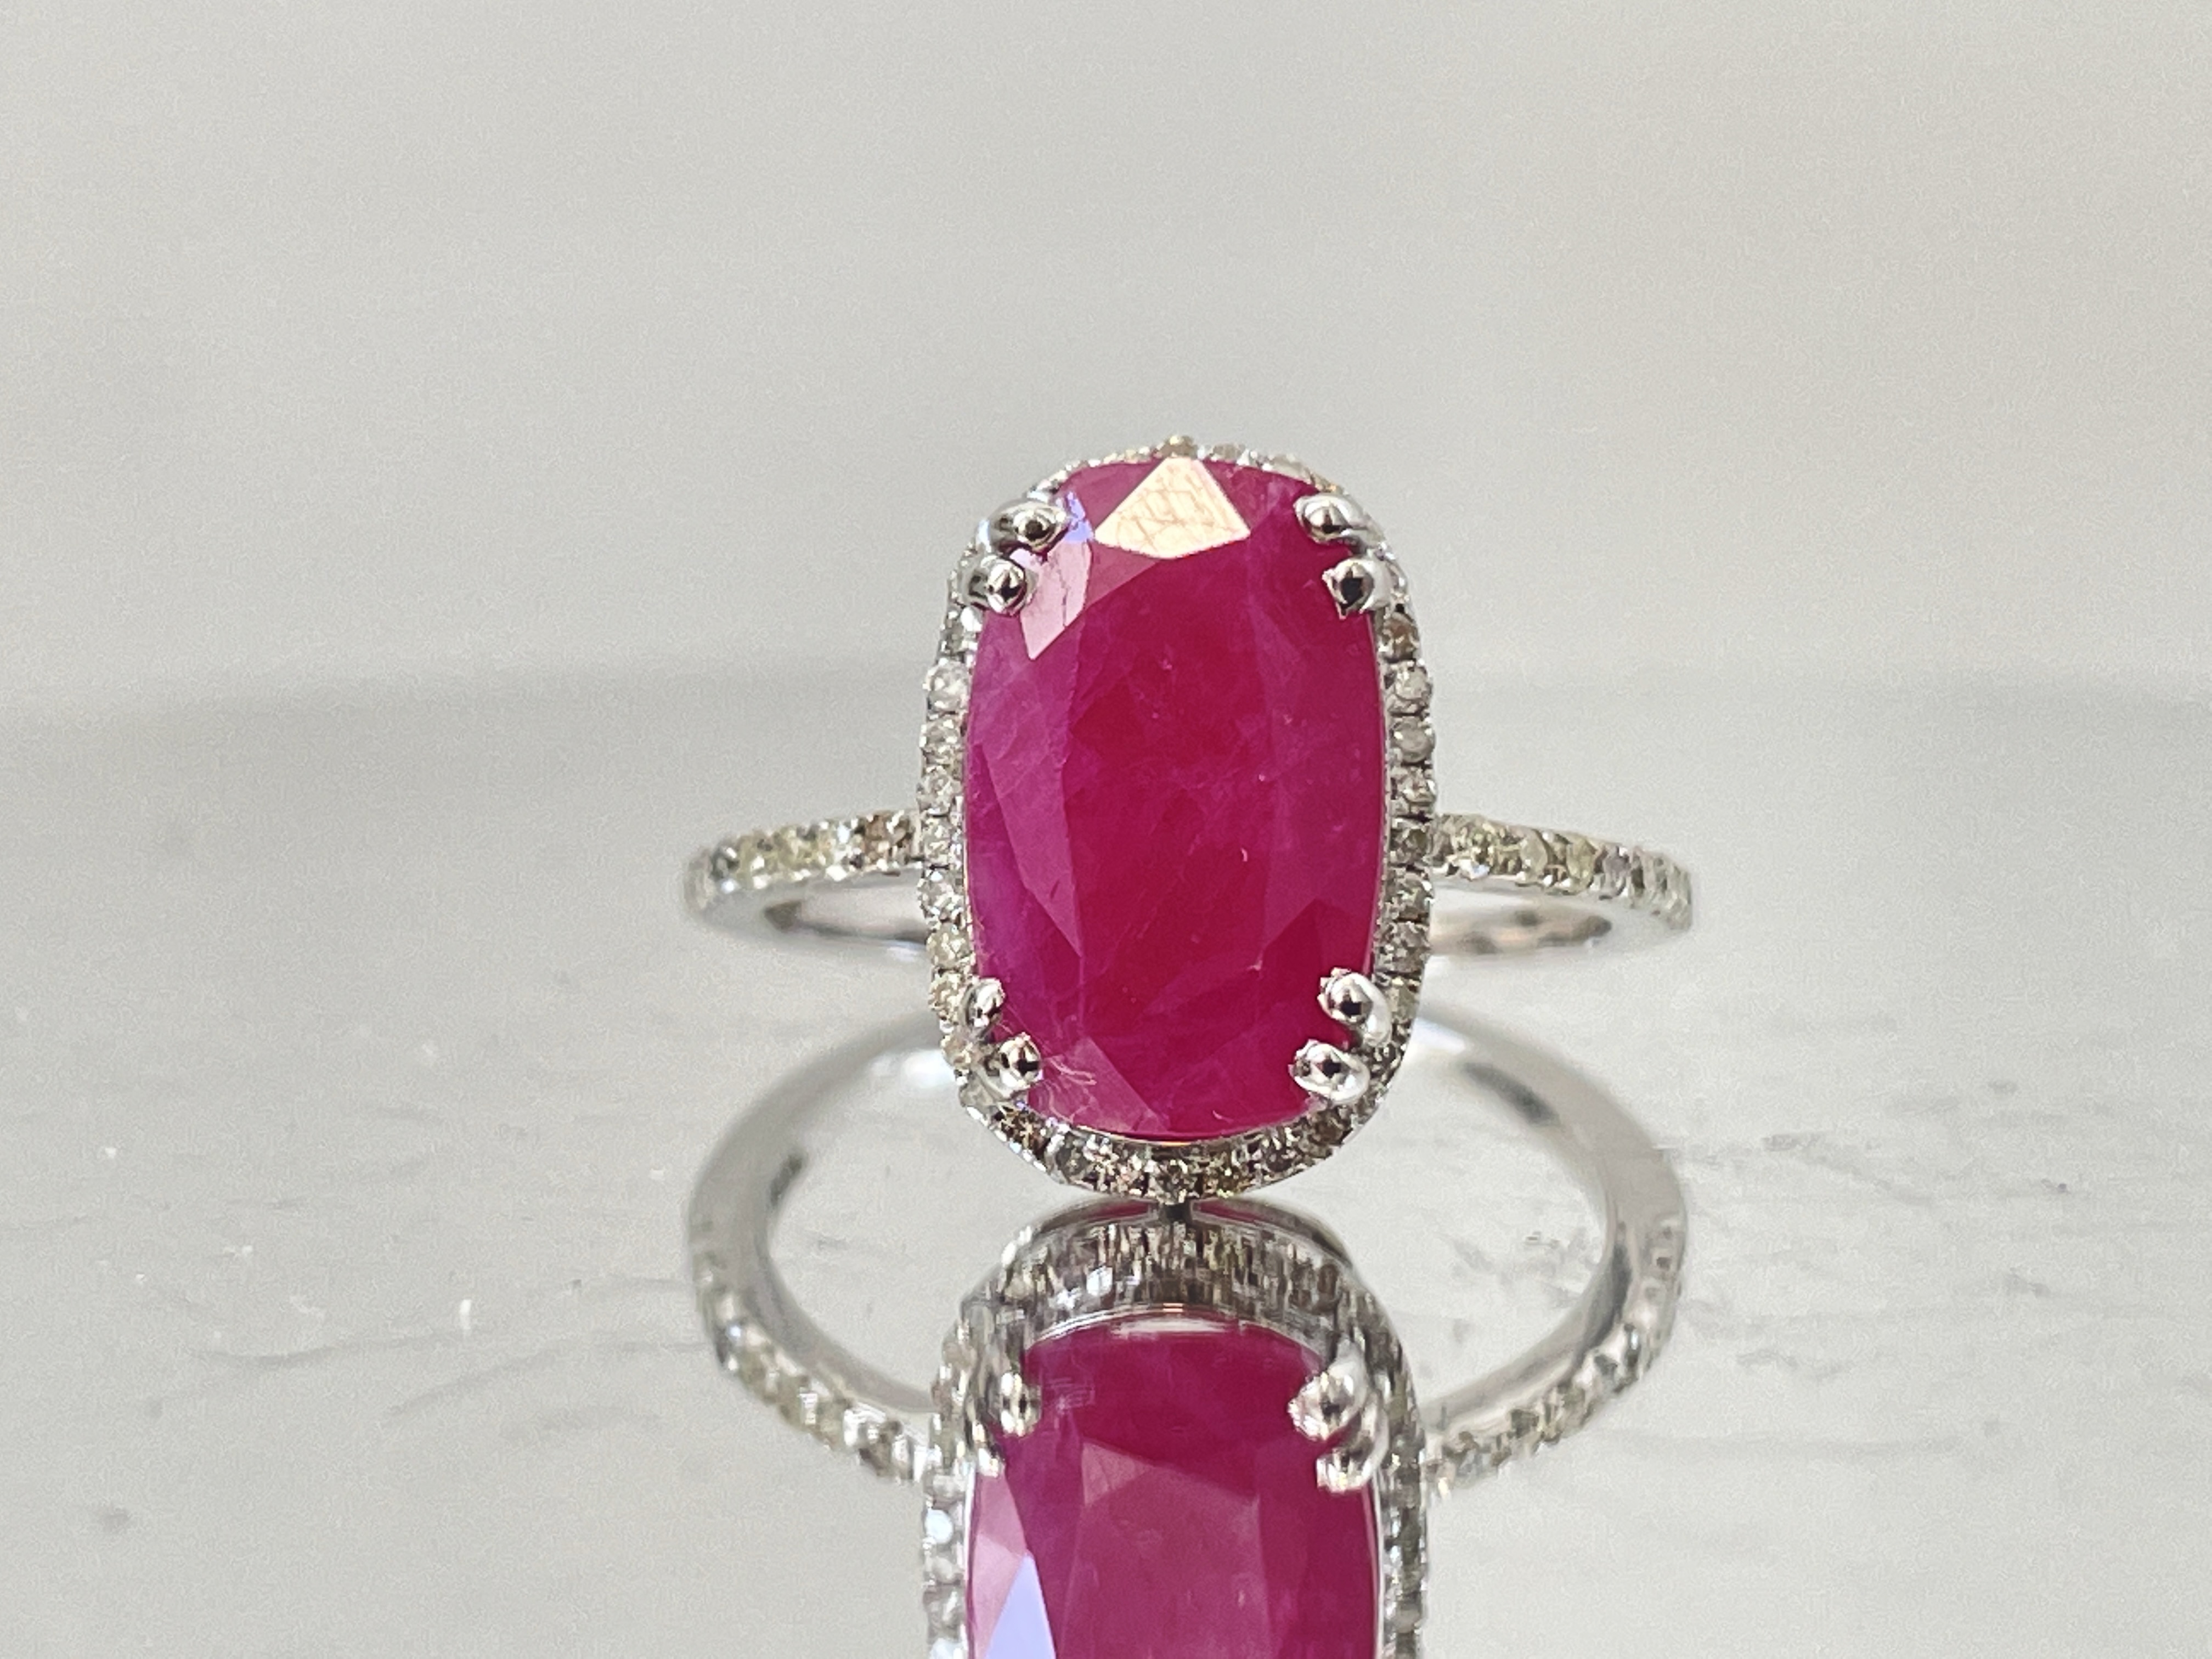 Natural Burma Ruby 4.12 Ct With Natural Diamonds & 18k Gold - Image 2 of 6